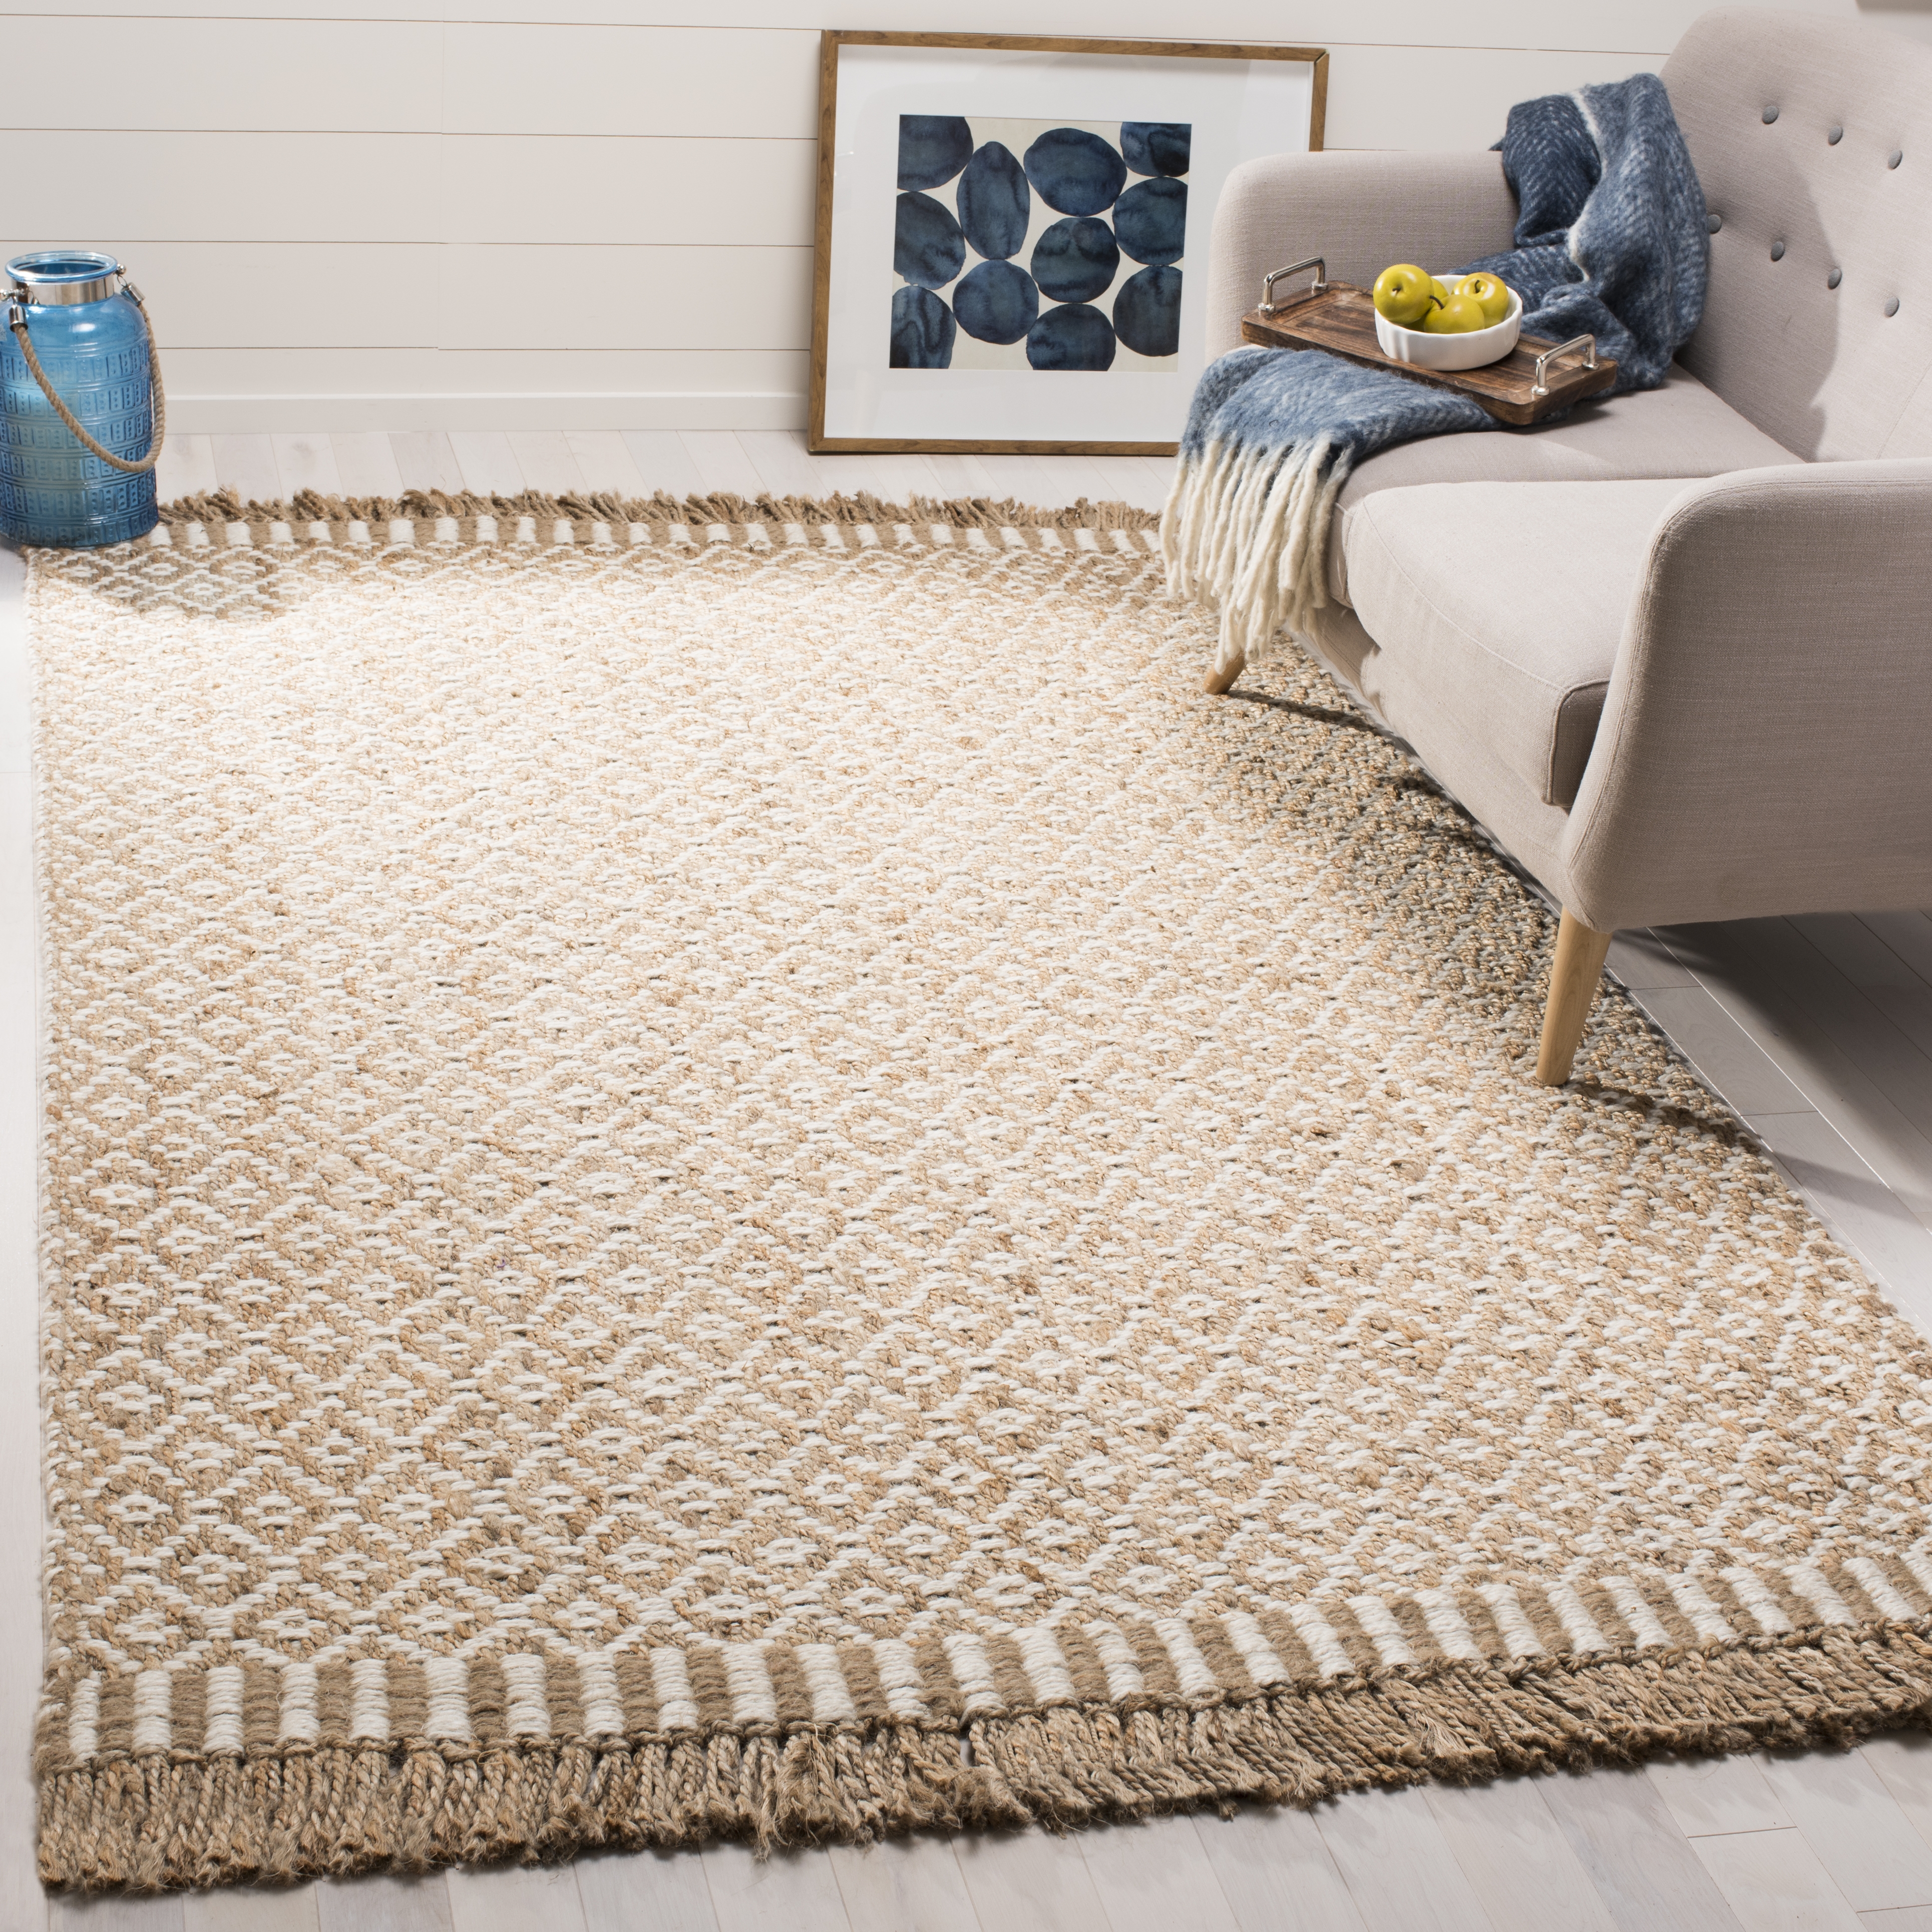 Arlo Home Hand Woven Area Rug, NF182A, Natural/Ivory,  5' X 8' - Image 1